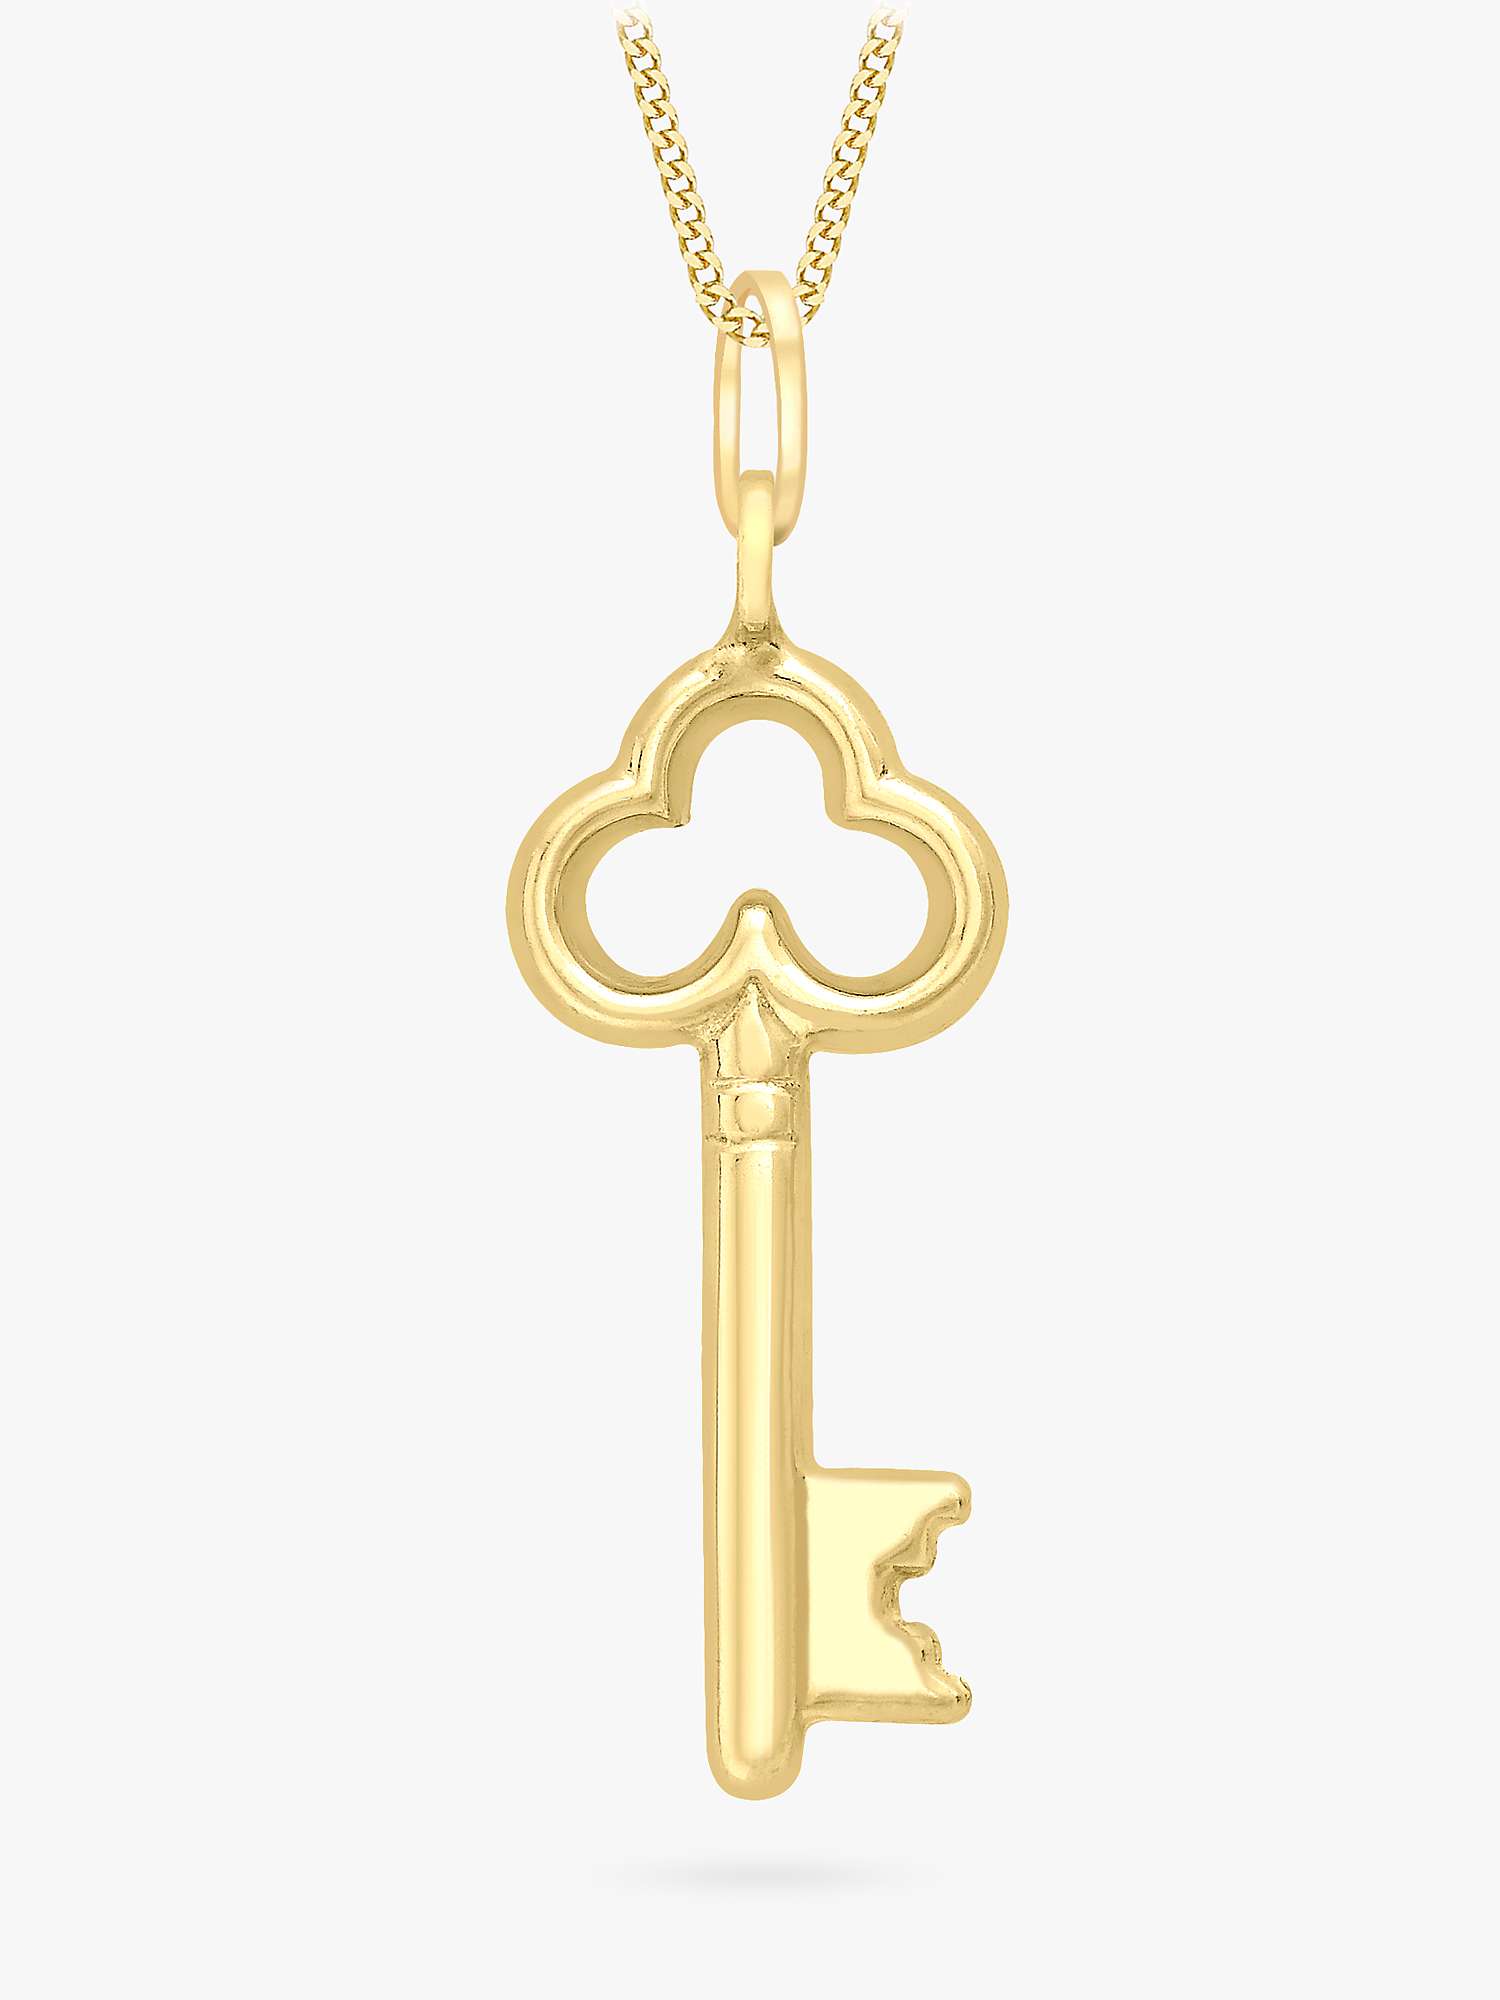 Details about   NEW 9ct Yellow Gold Key Pendant 375 Charm 9KT 9K Open Lock New Beginnings Start